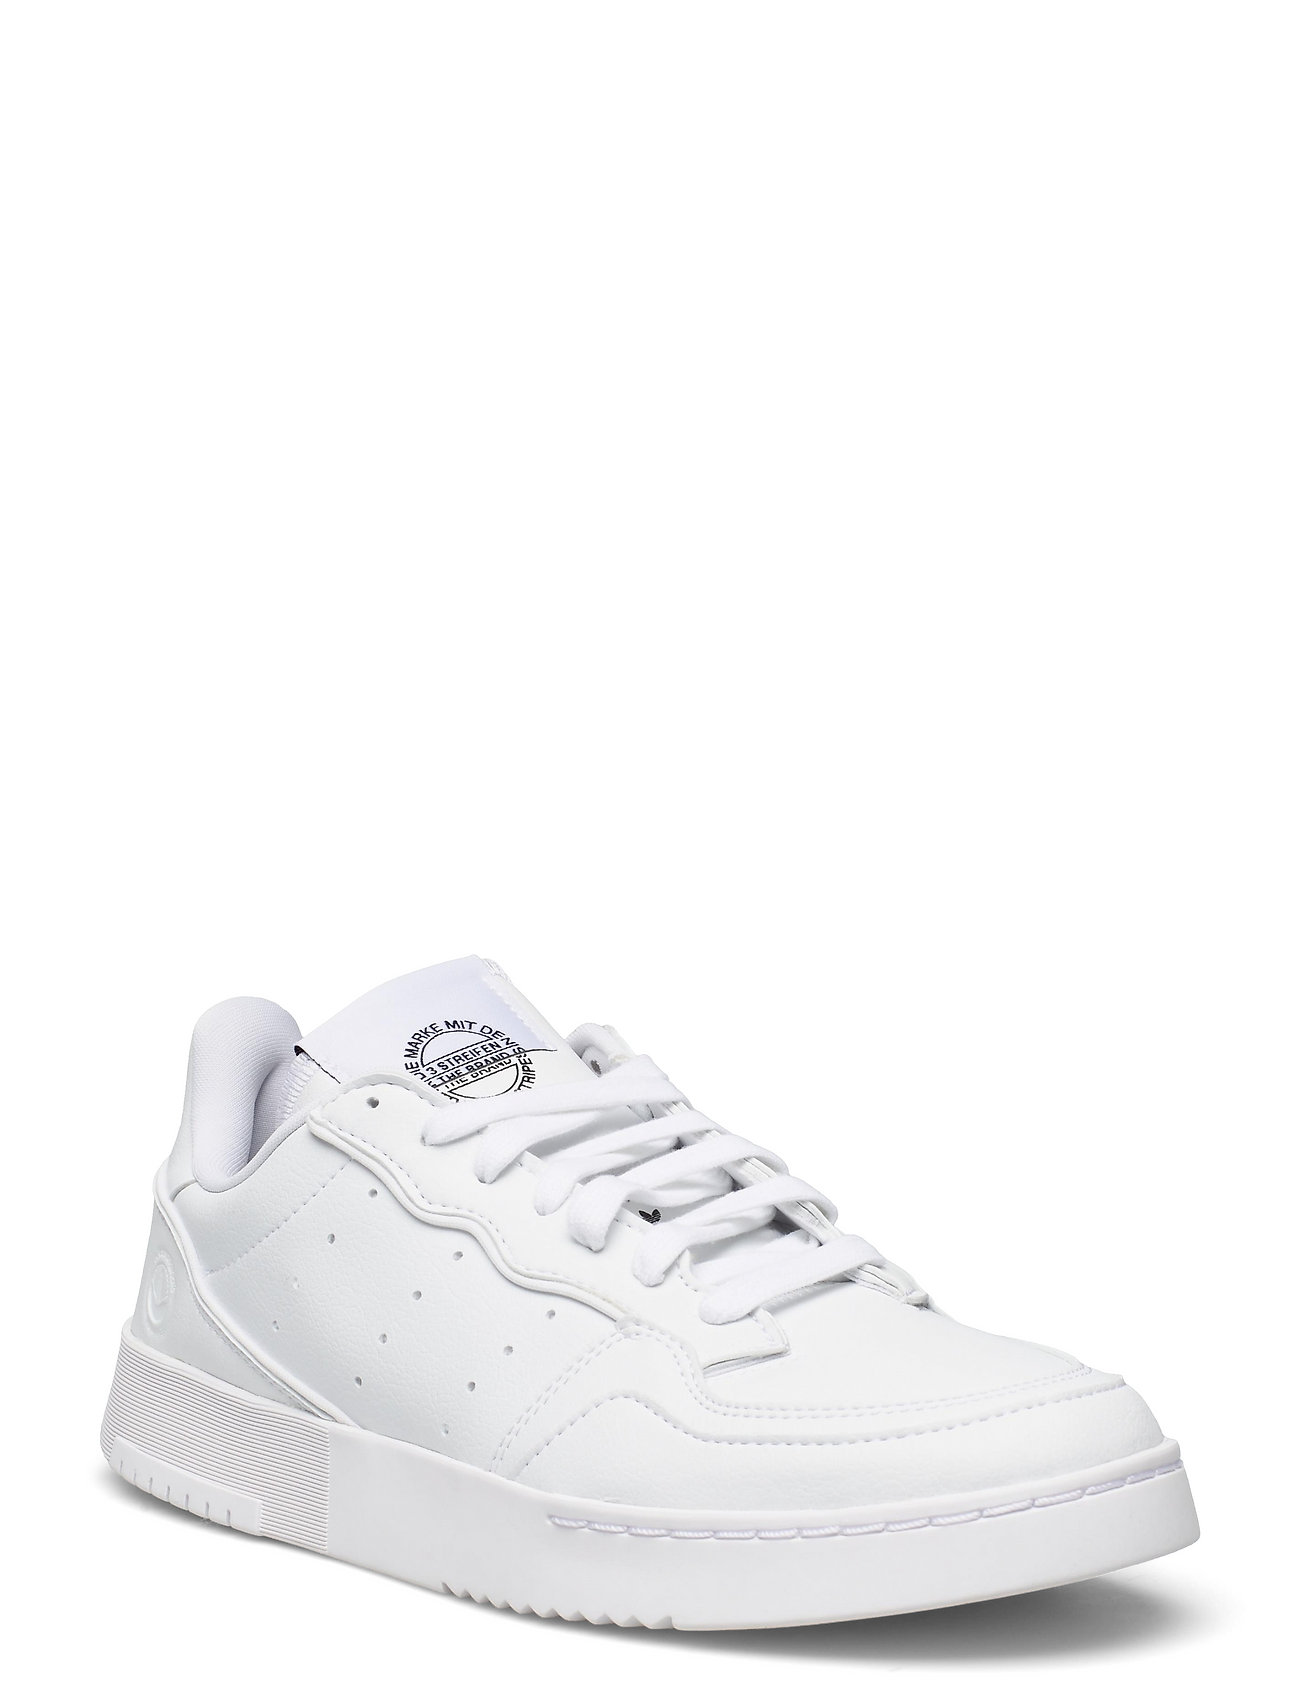 Sort Supercourt Low-top Sneakers Adidas sneakers for herre - Pashion.dk